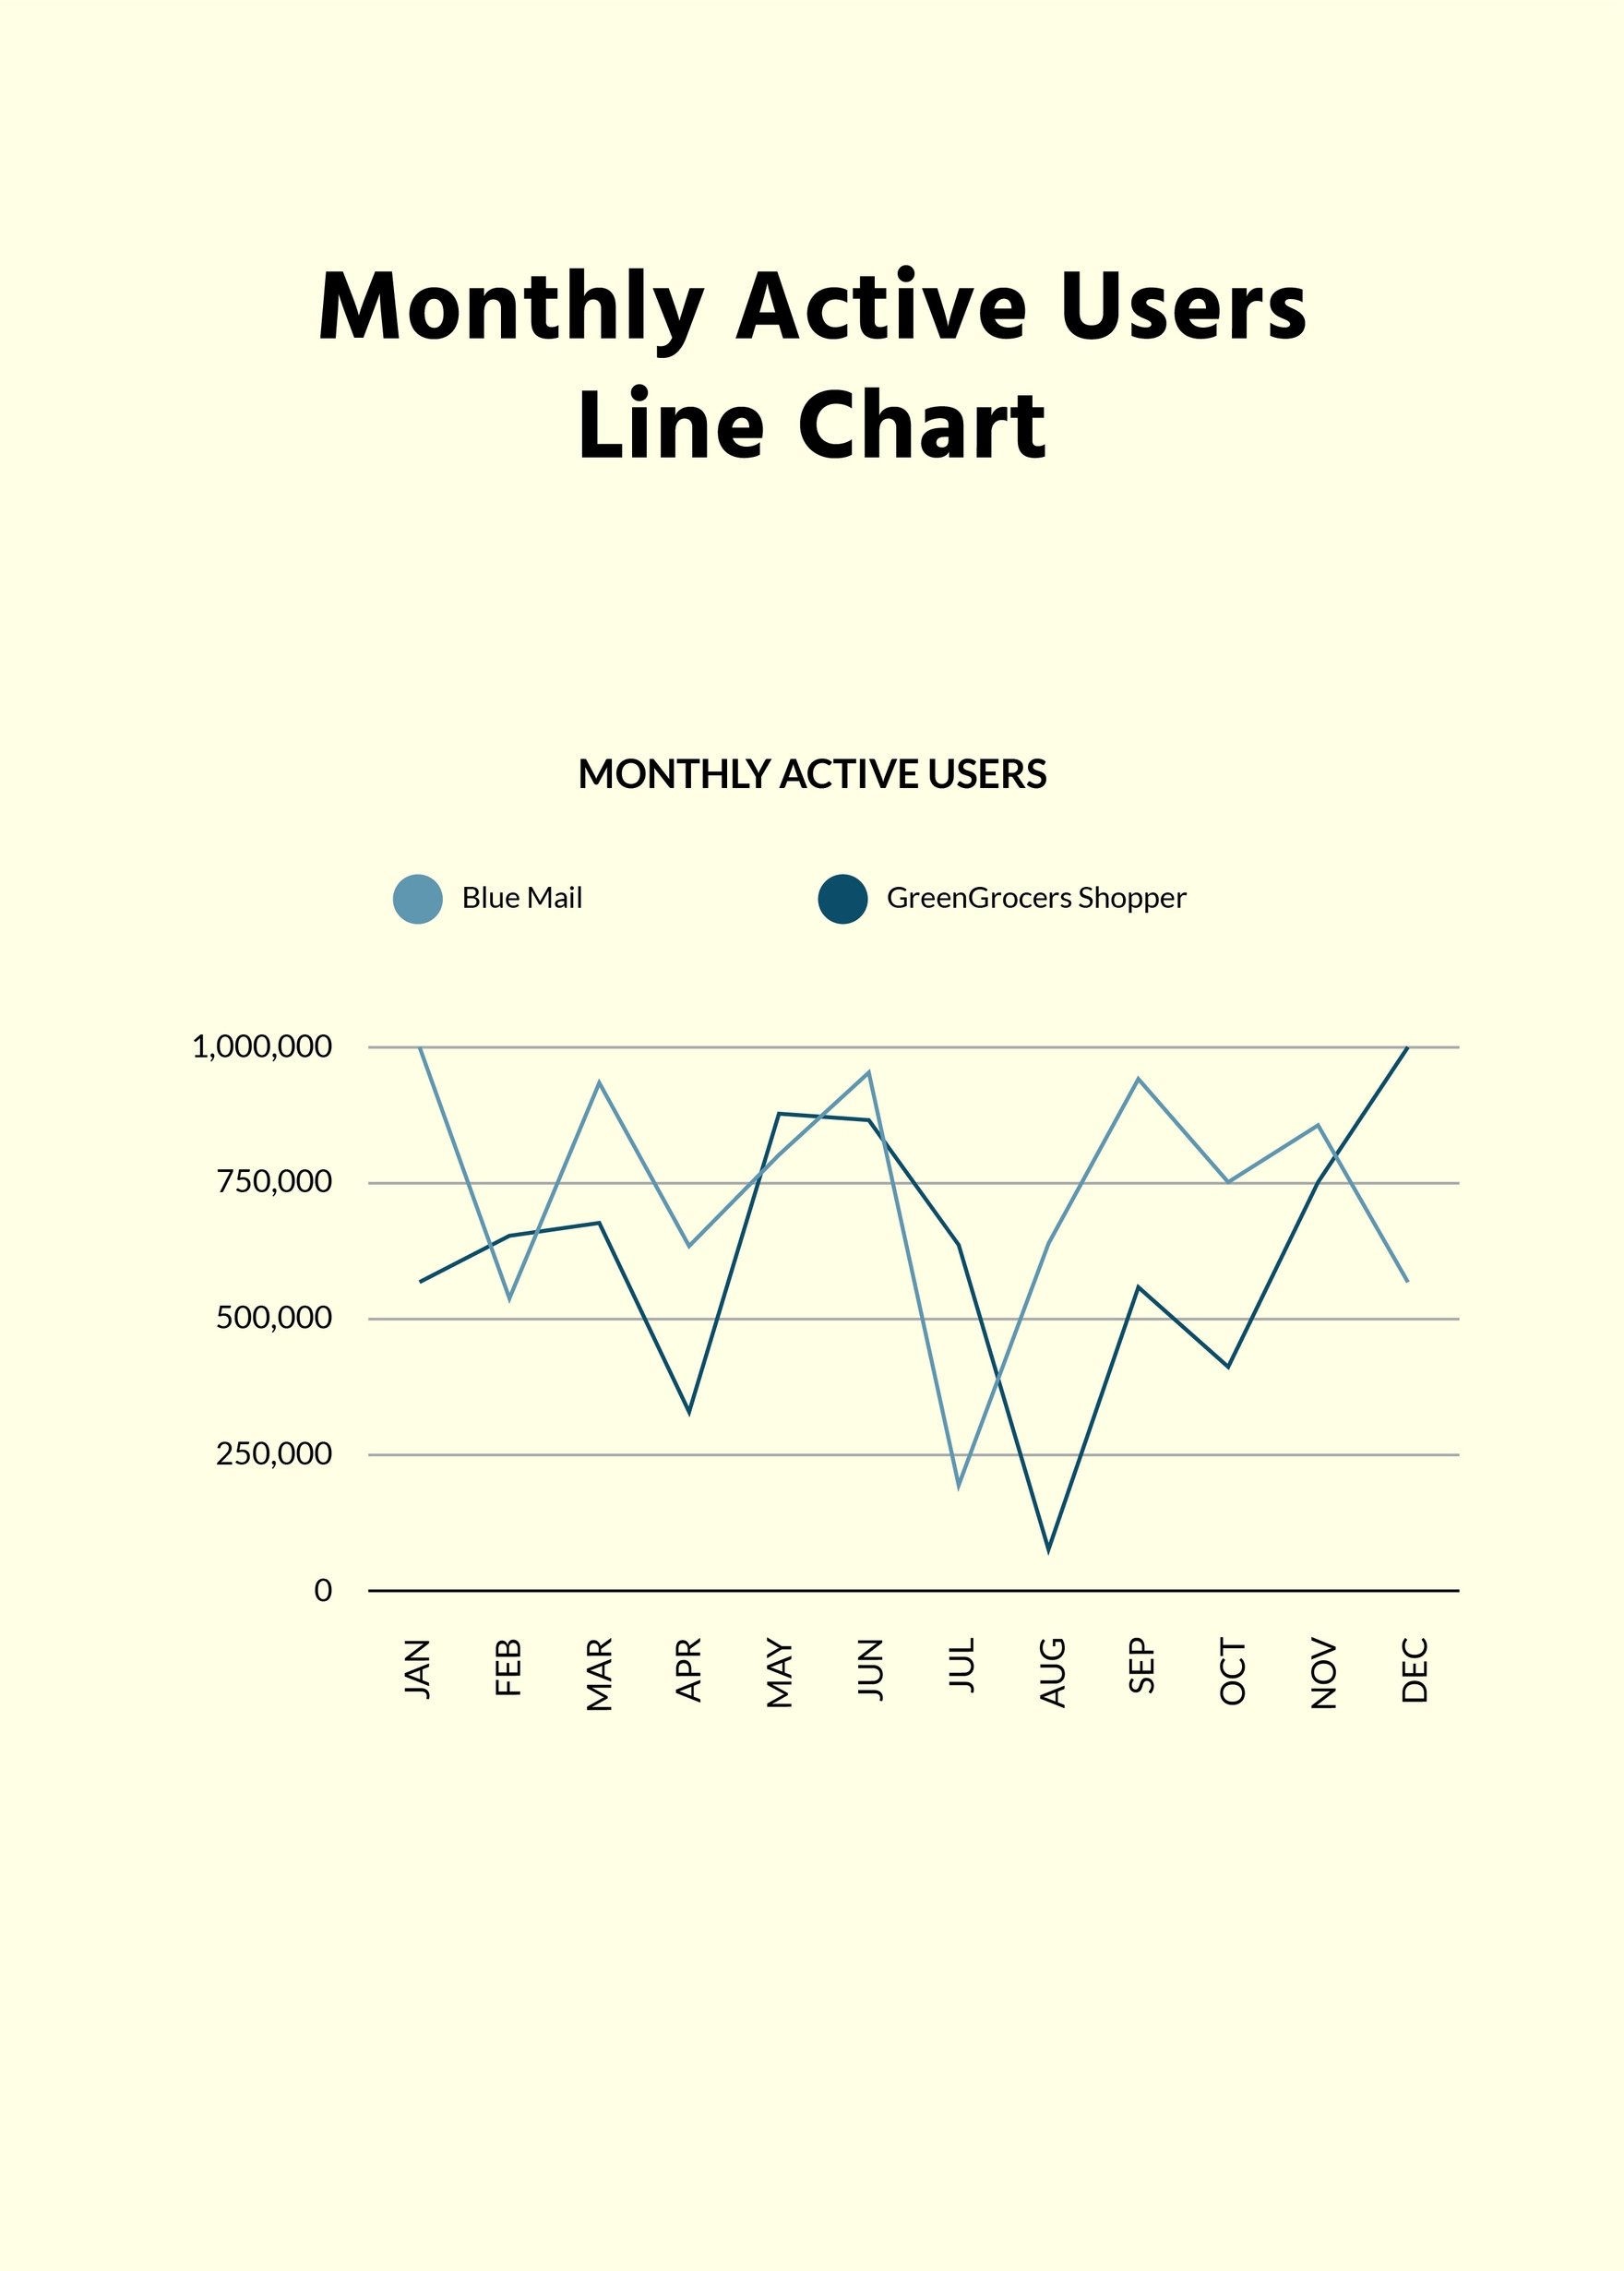 Monthly Active Users Line Chart in PDF, Illustrator